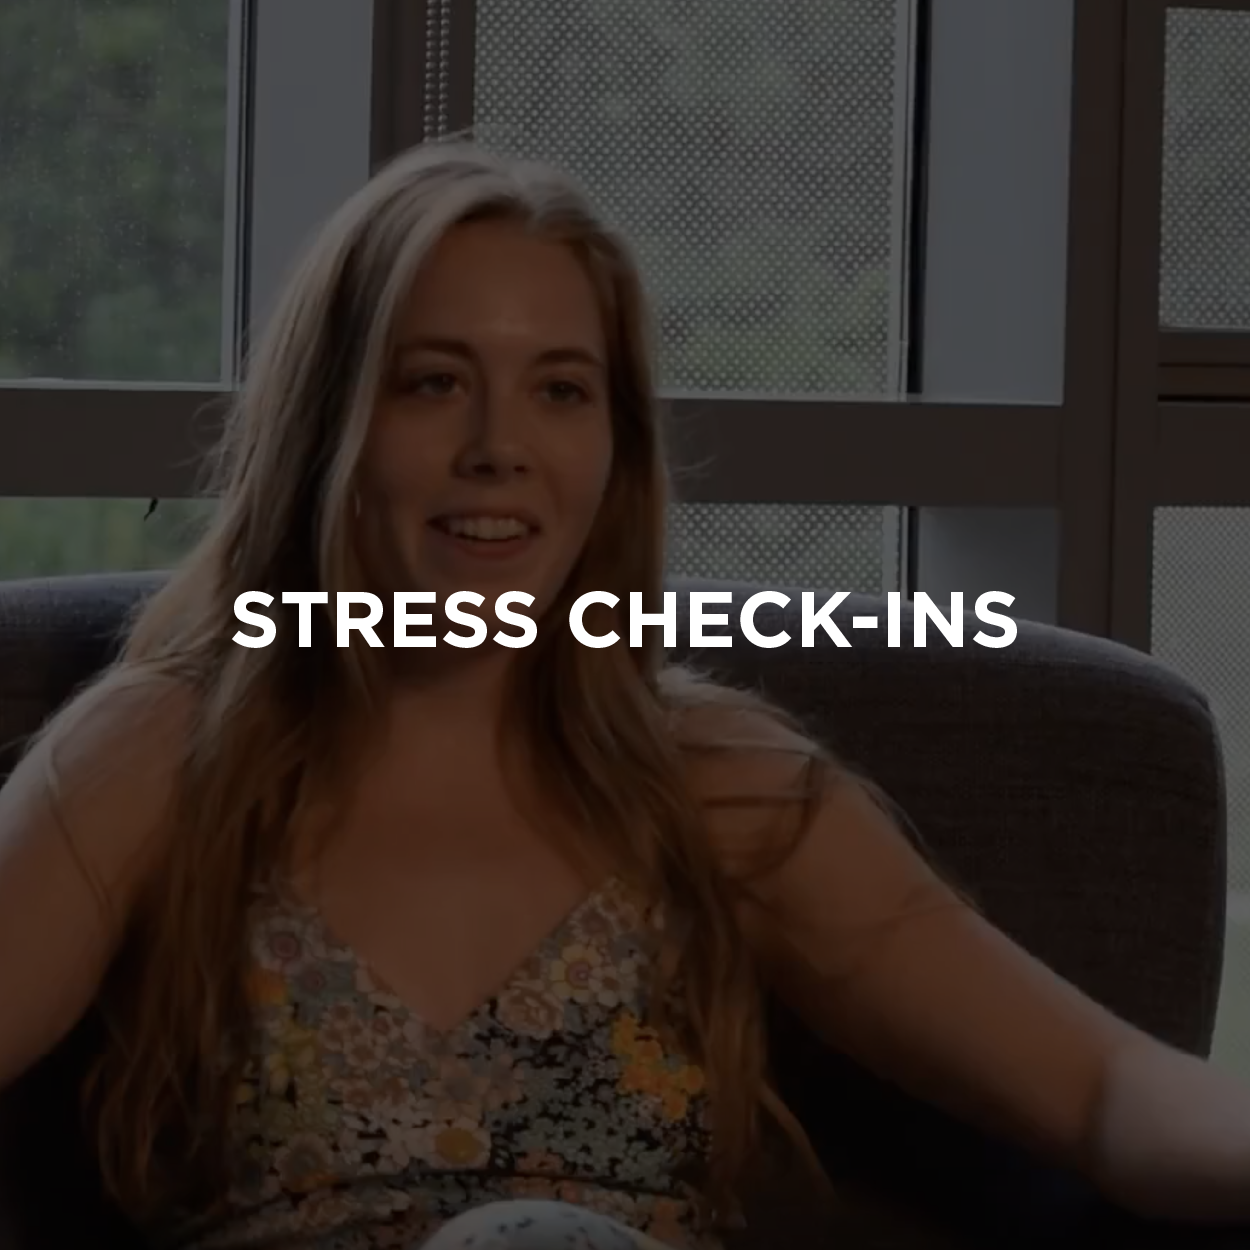 student during a stress check-in